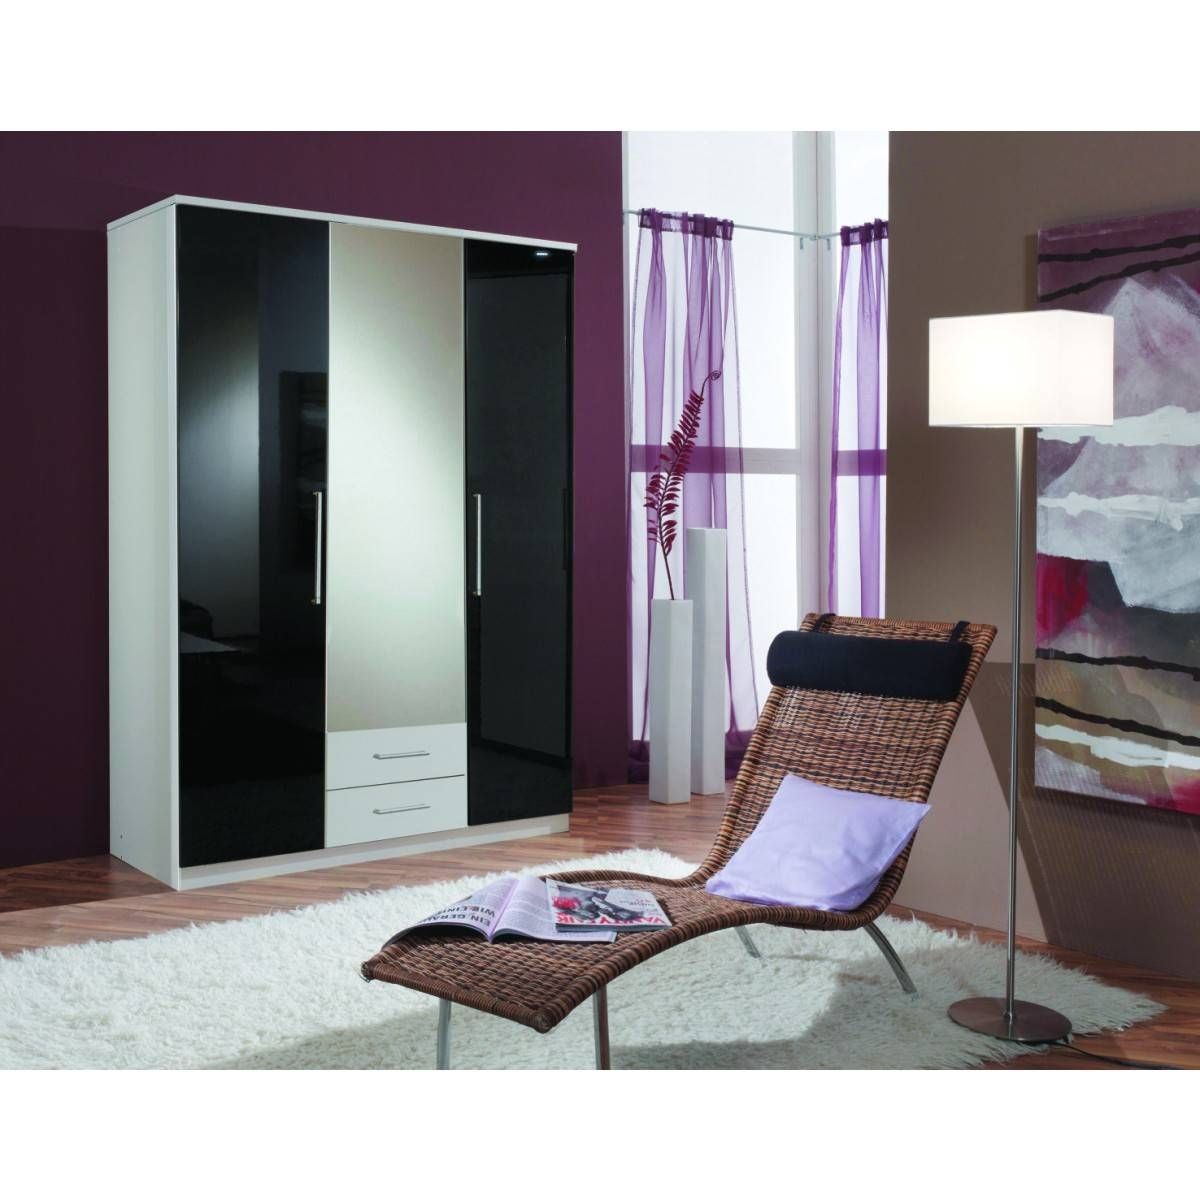 Discount Furniture 4 U Throughout Black Gloss Wardrobes (View 15 of 15)